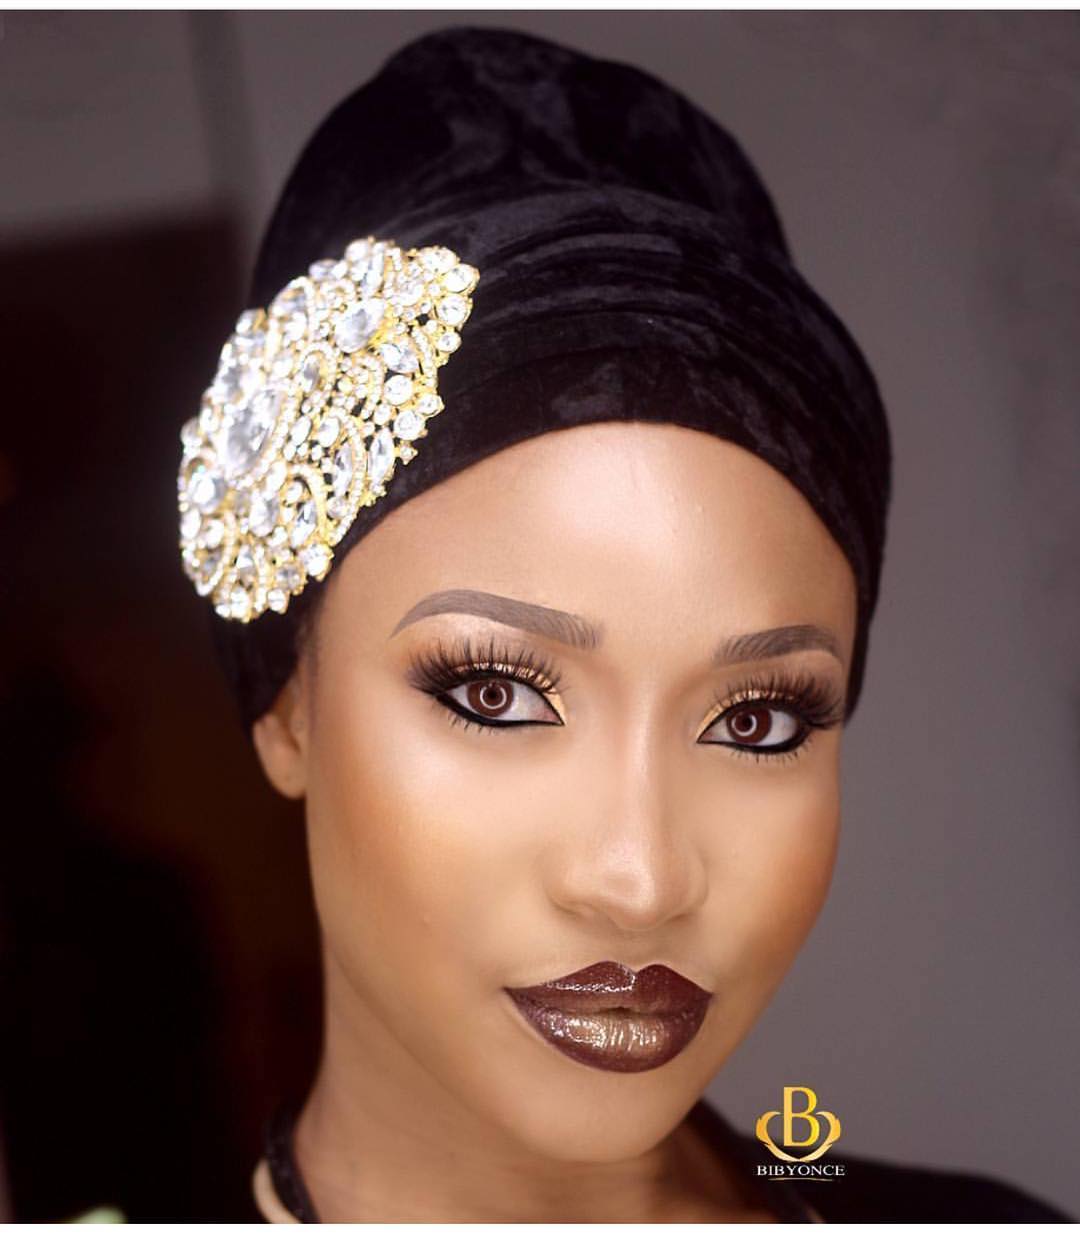 Tonto Dikeh Steps Out To Worship God In This Outfit (Photos)